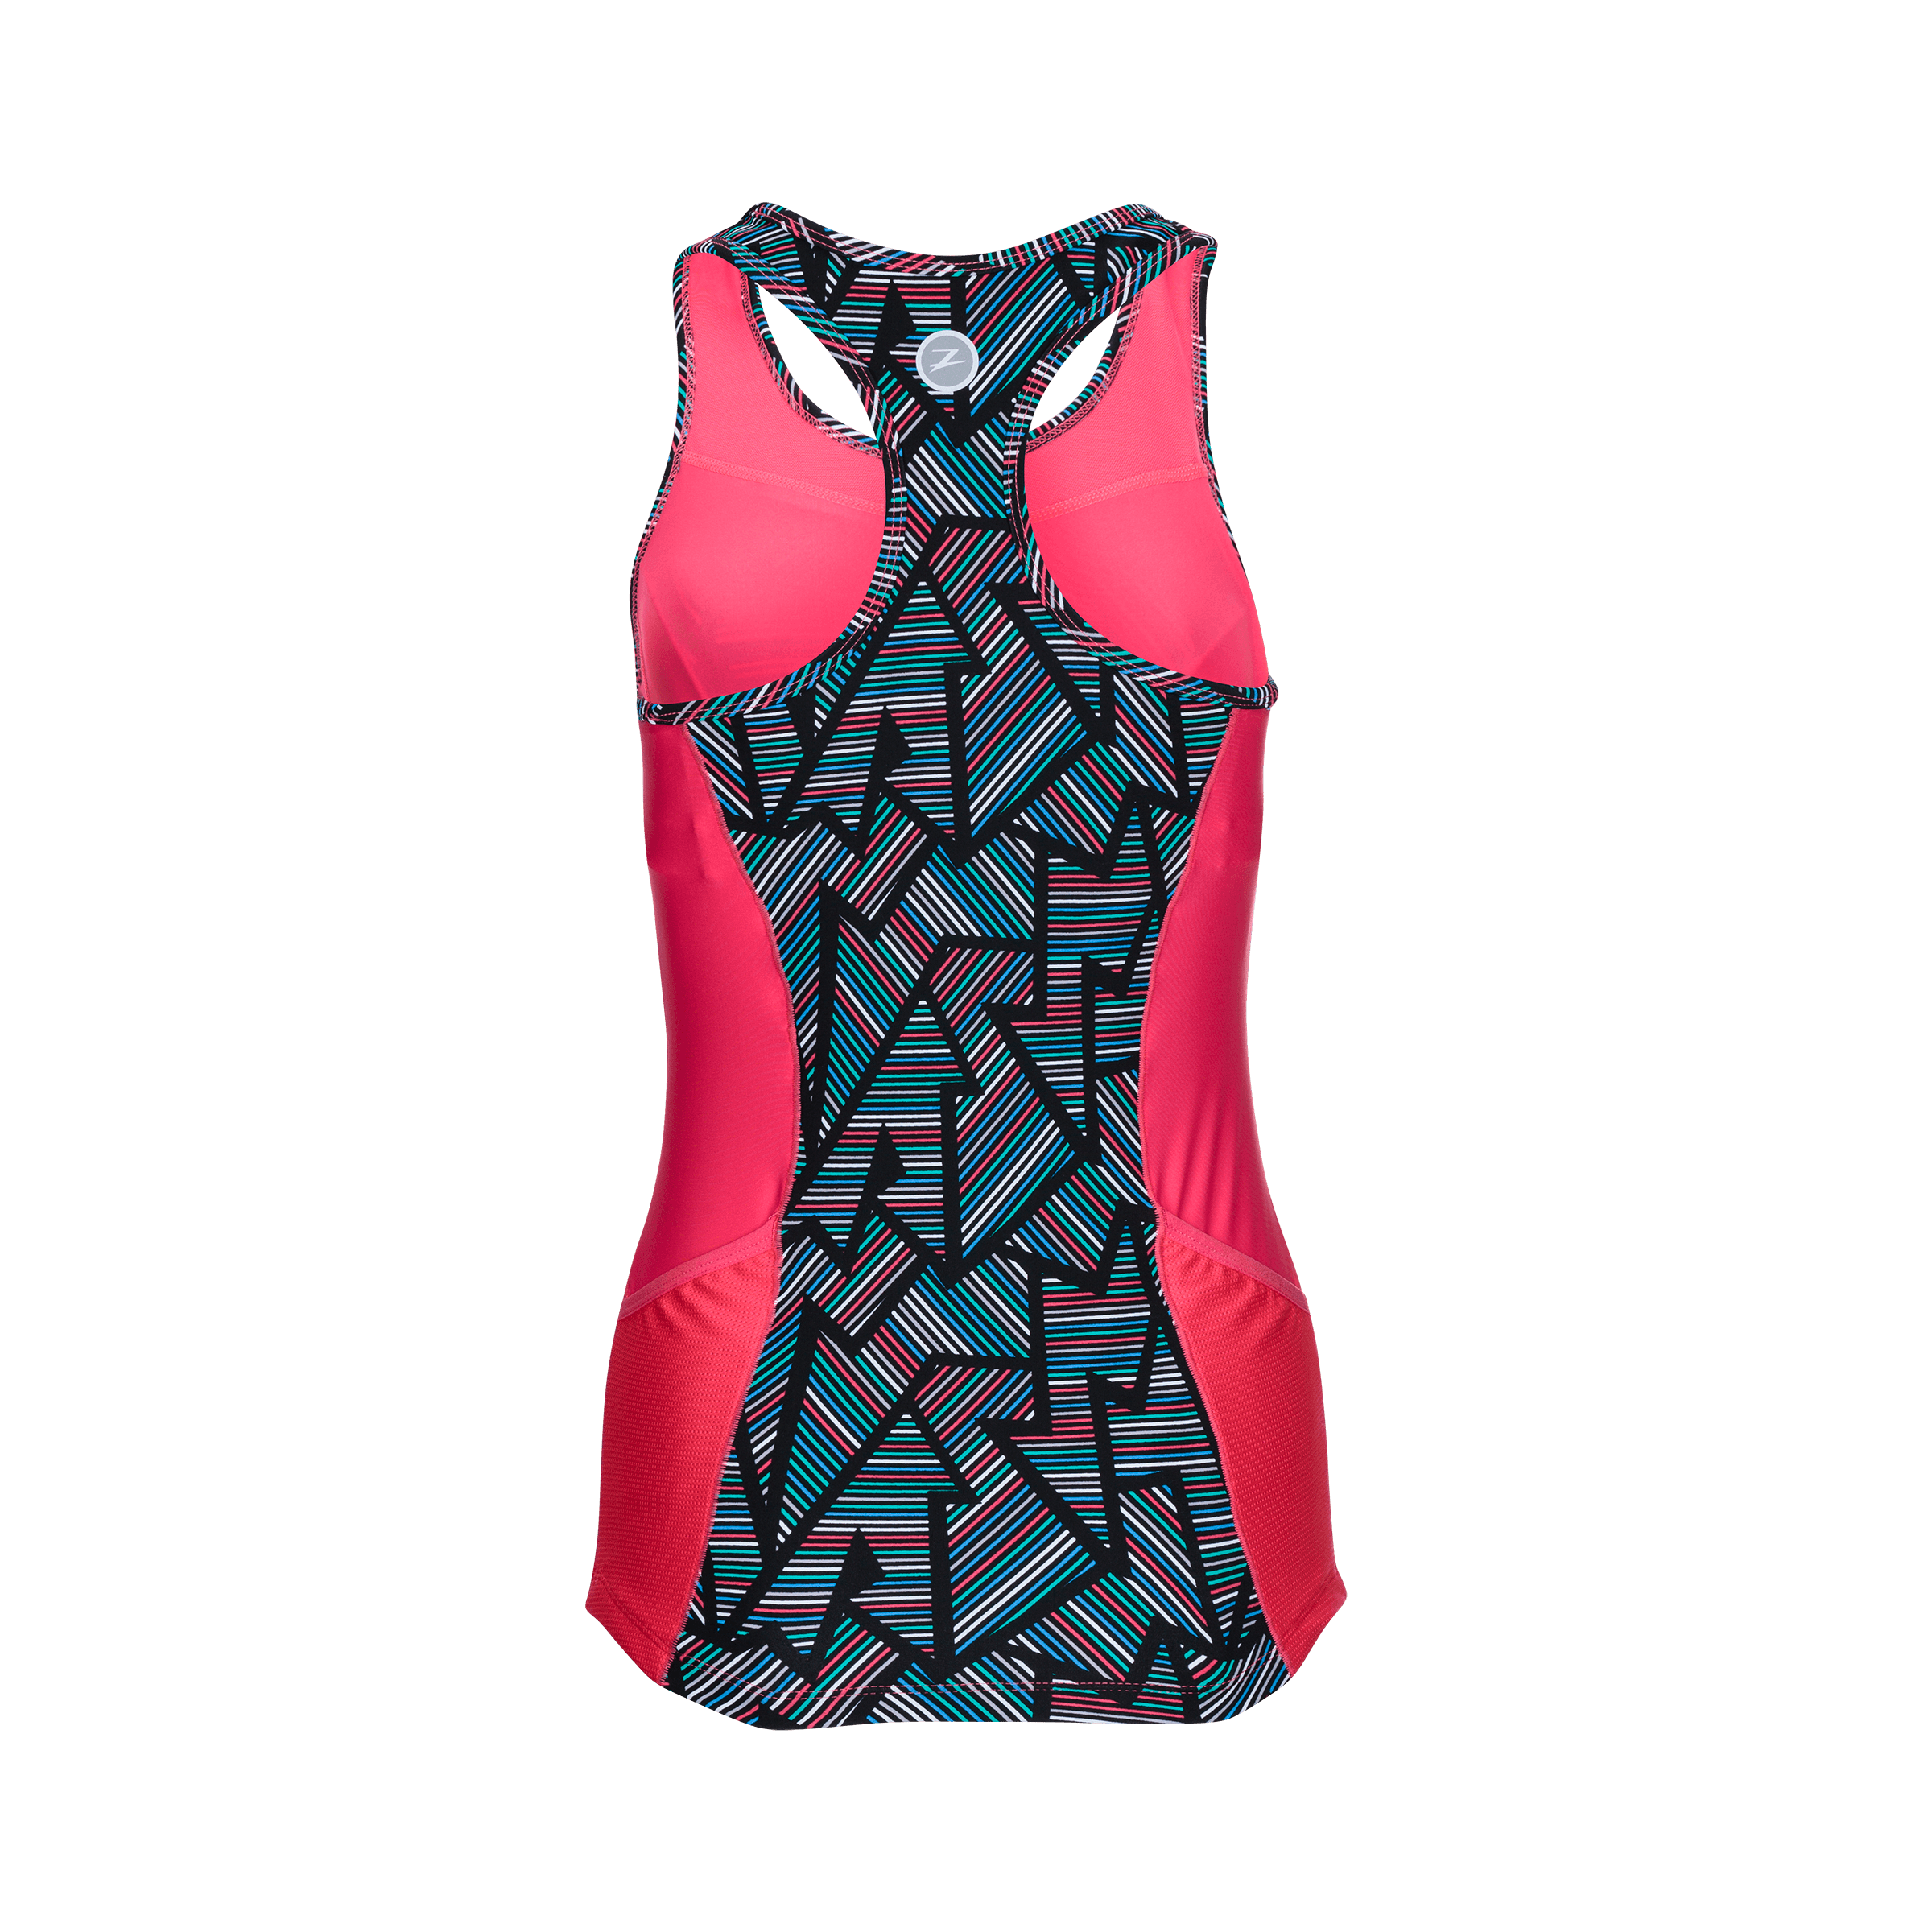 Zoot Sports TRI APPAREL WOMENS PERFORMANCE TRI RACERBACK - PINK GINGER